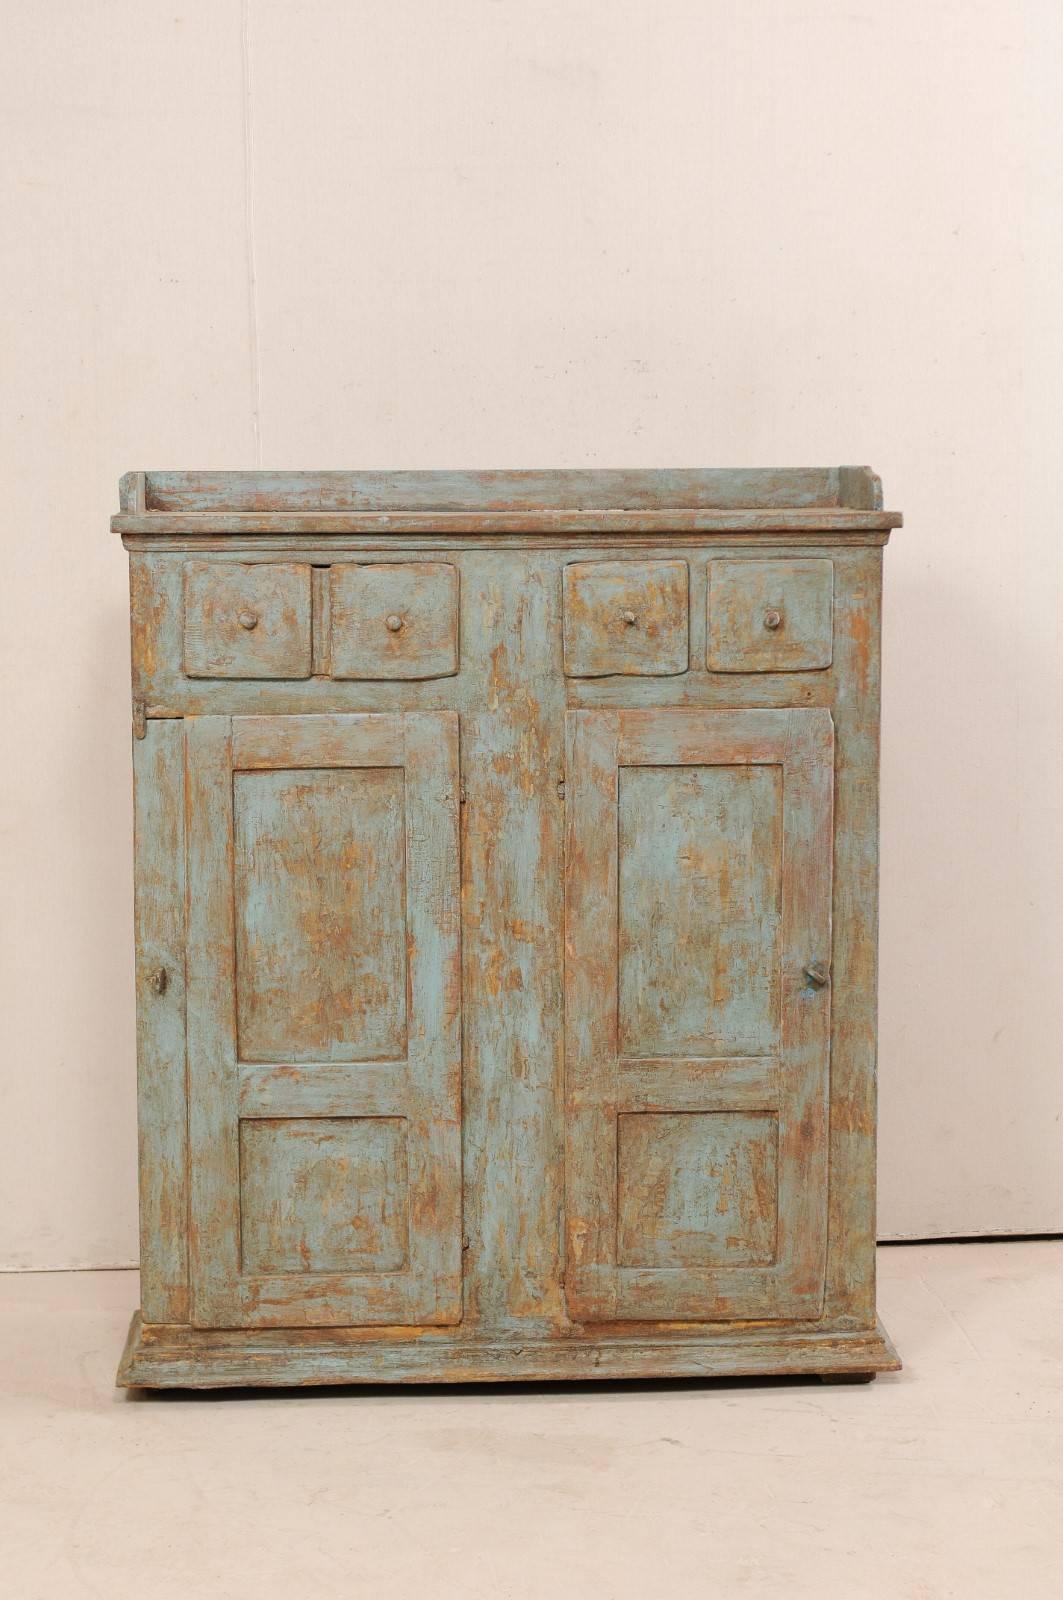 An 18th century Swedish painted wood cabinet. This antique mid-sized cabinet from Sweden features three drawers over two-panelled doors with interior shelves within. The upper left drawer is a half sized drawer, though it's appearance matches that